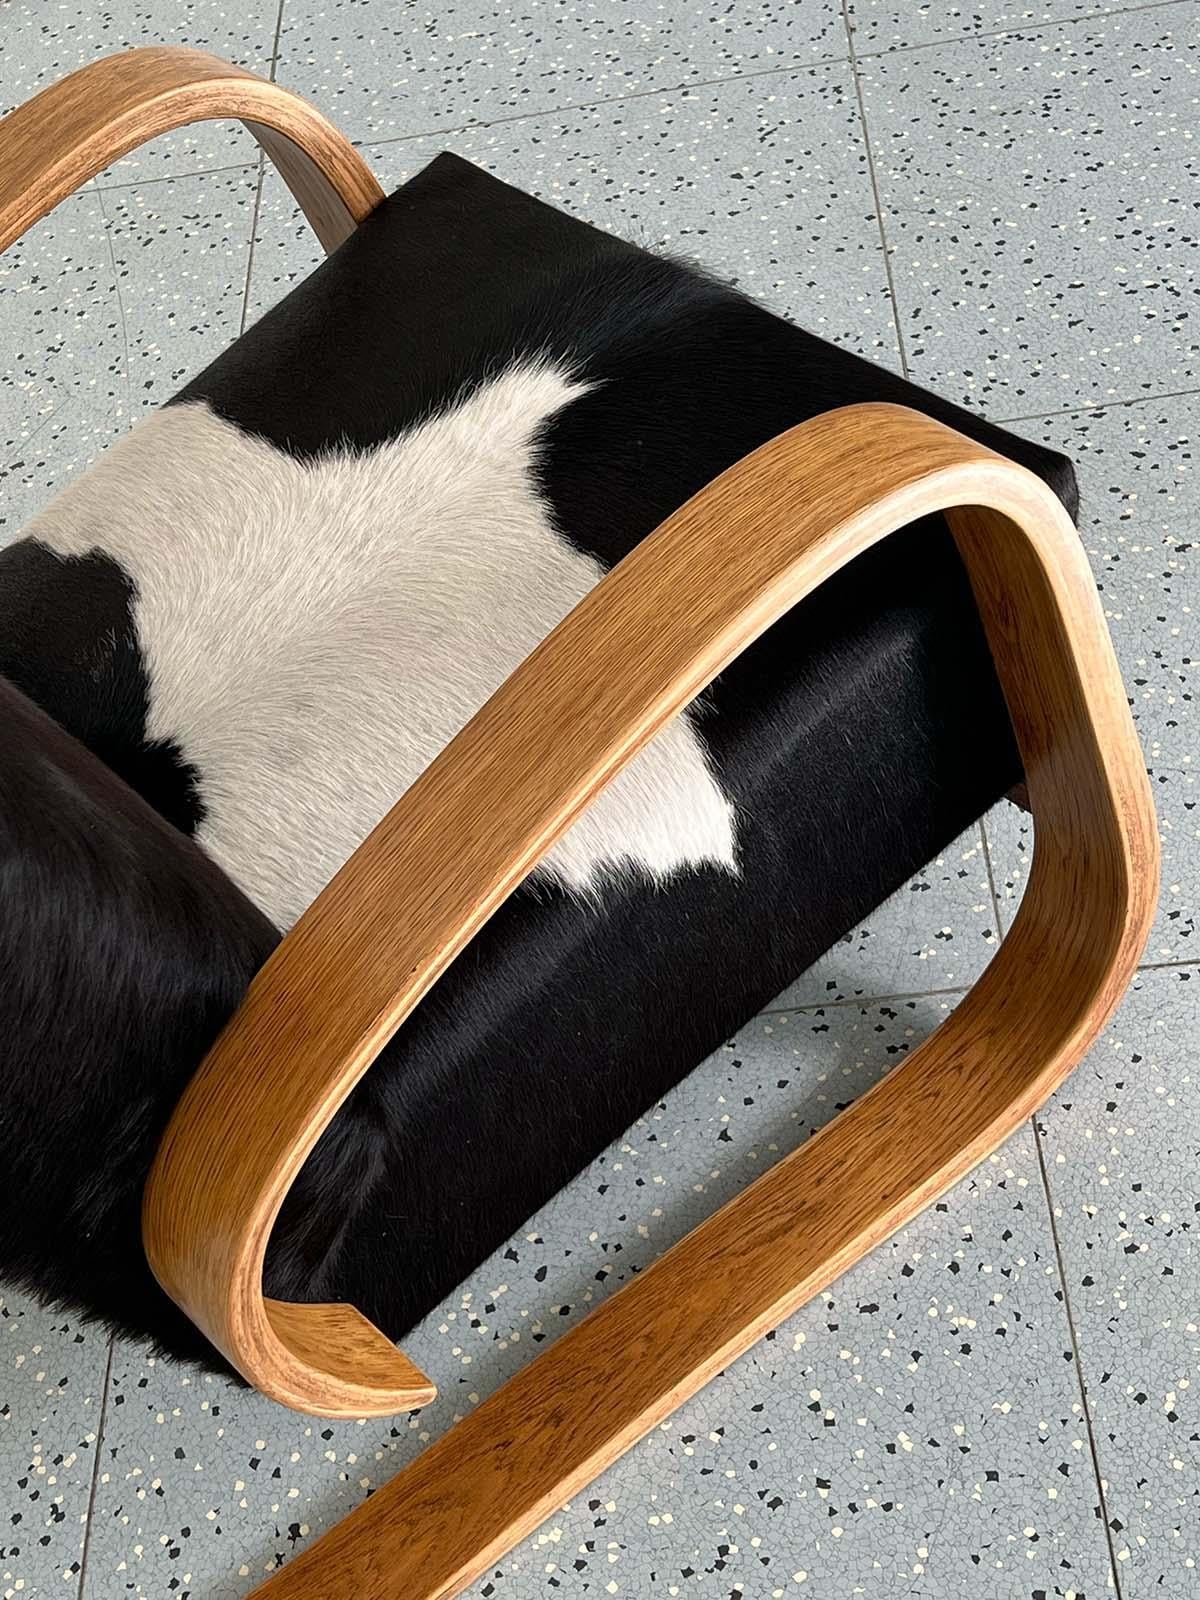 Mid-20th Century Cantilever Lounge Chair by Miroslav Navrátil in Cowhide, 1950s For Sale